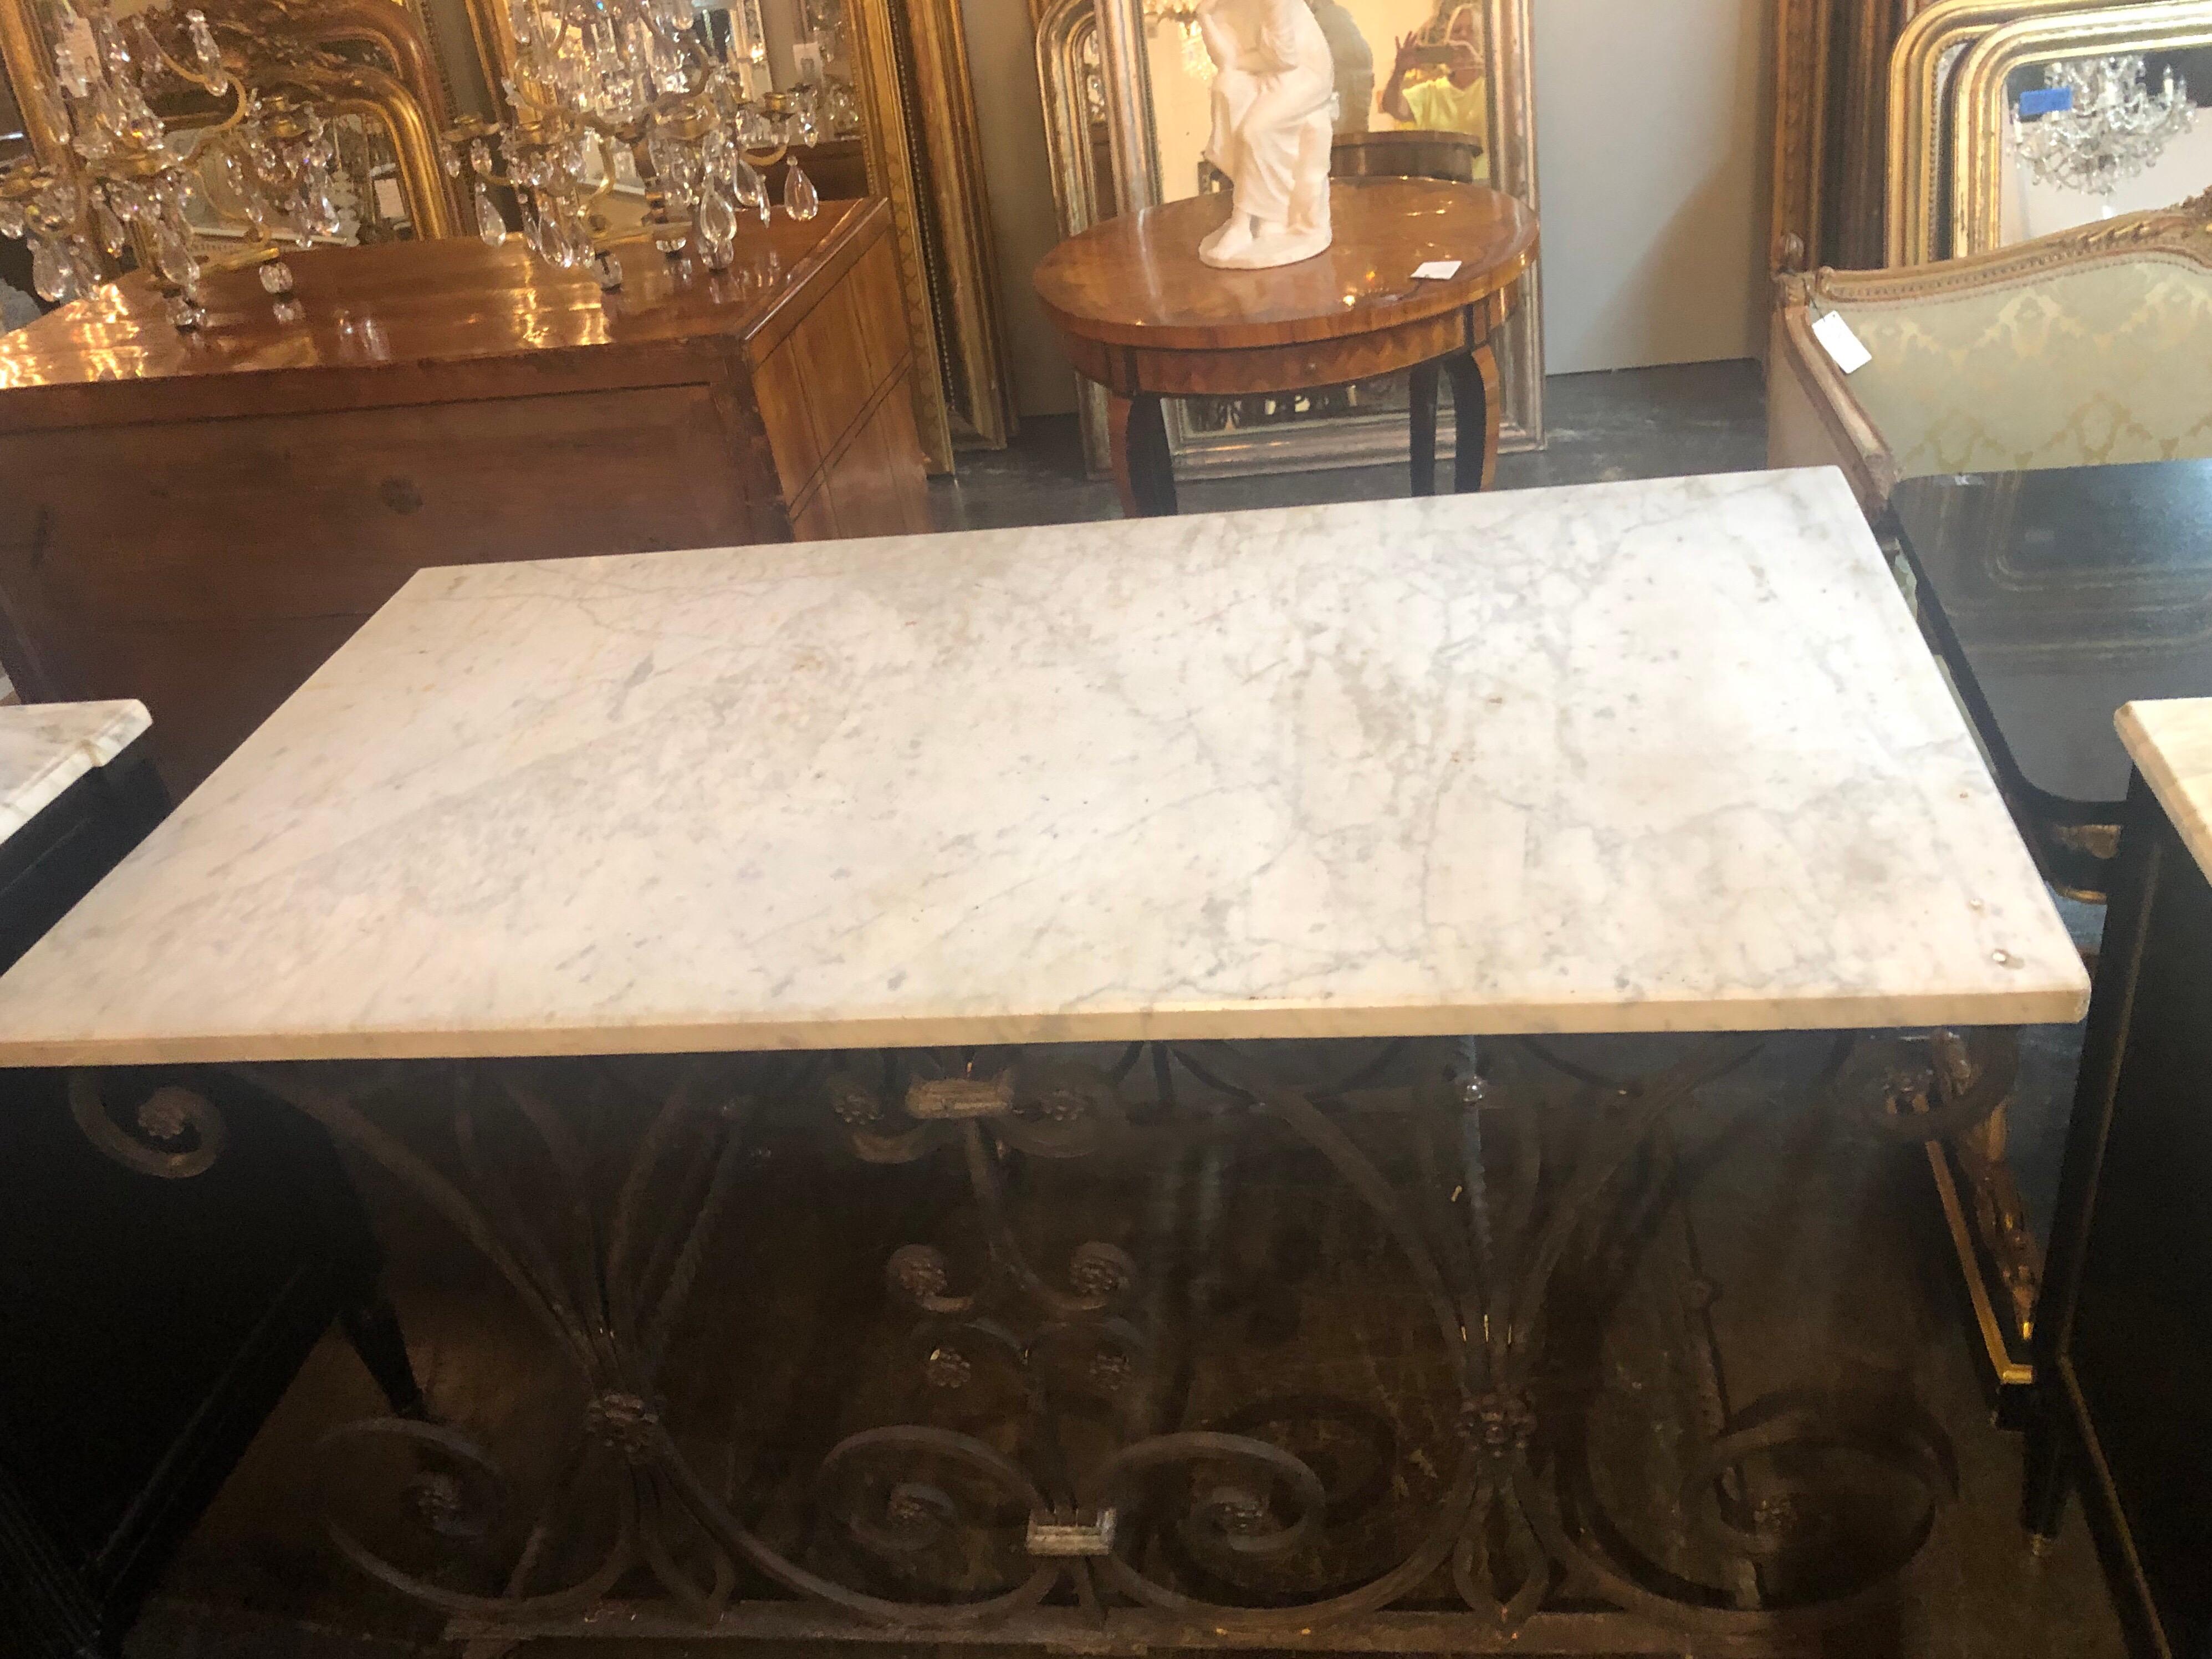 Gorgeous 19th century French wrought iron baker's table with Carrara marble top.
This table is functional as well as beautiful.